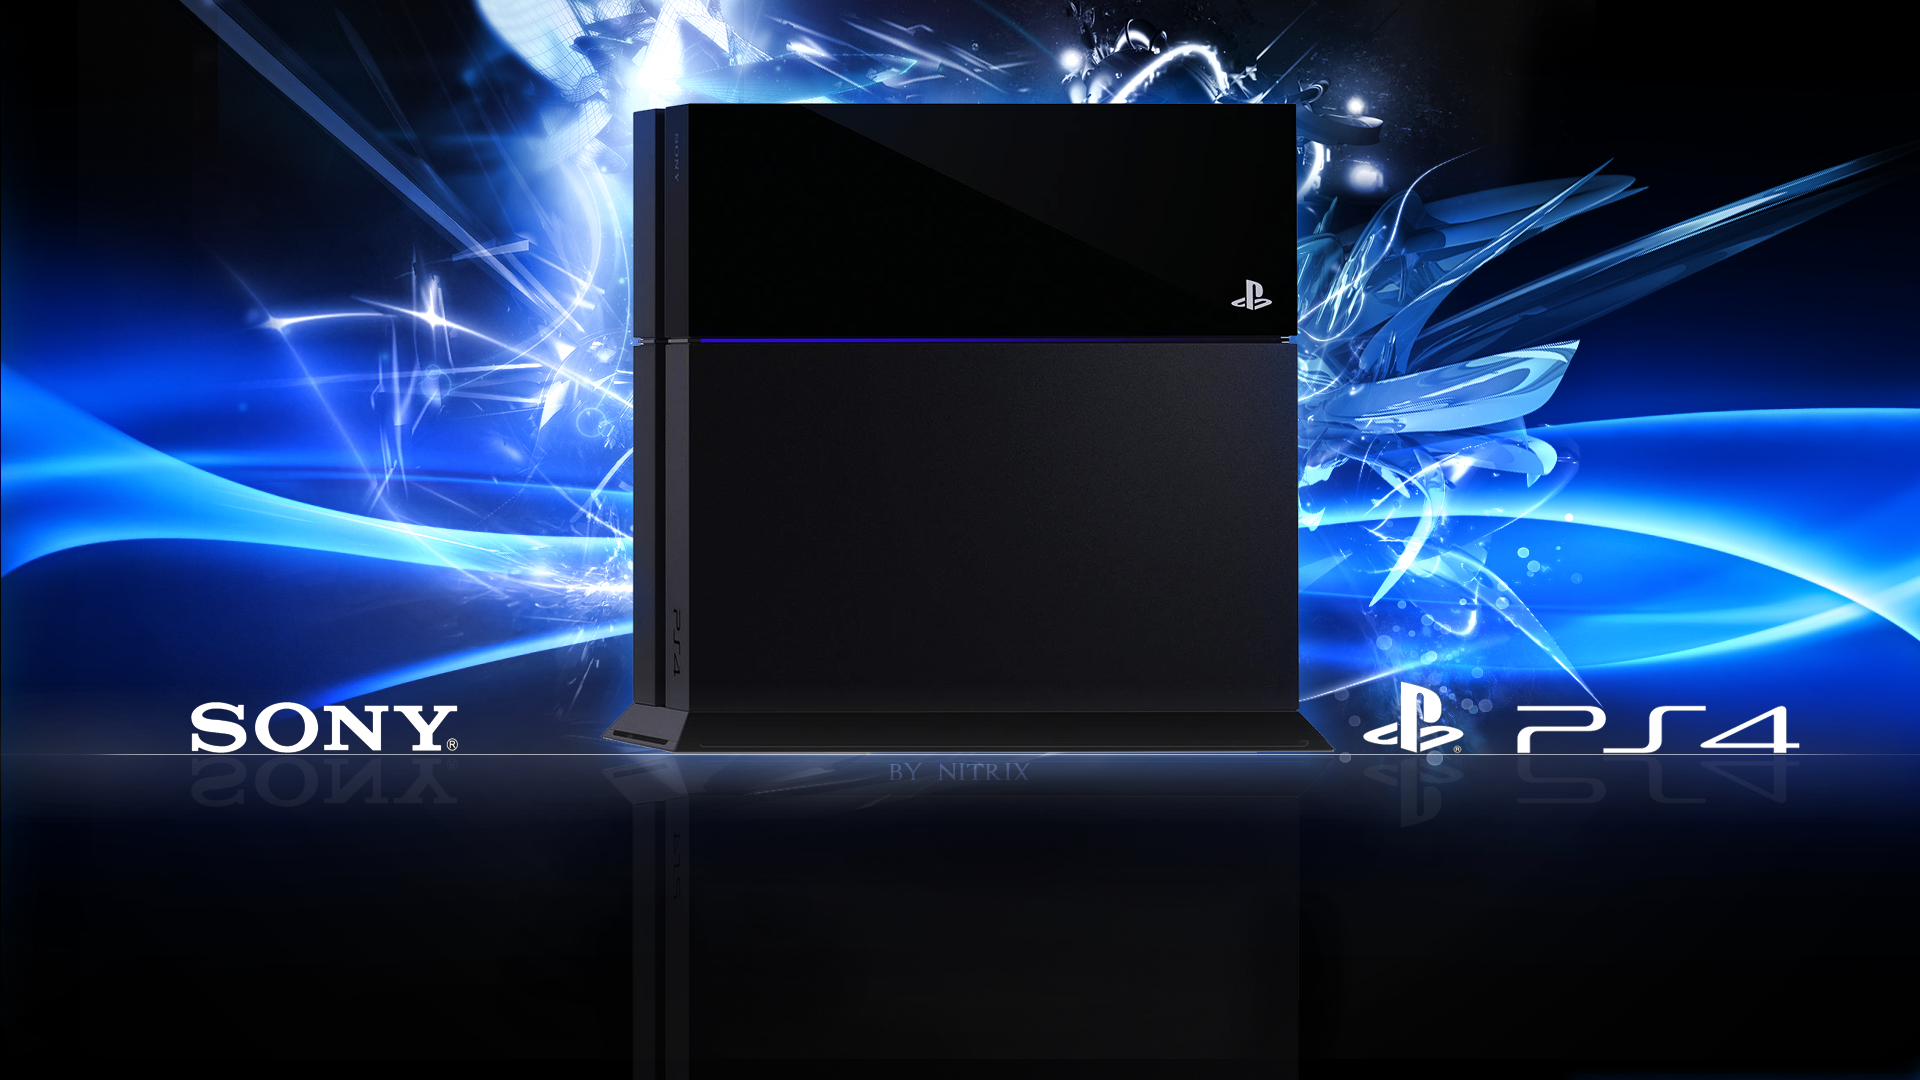 Abstract PS4 Wallpaper by nitr1x on